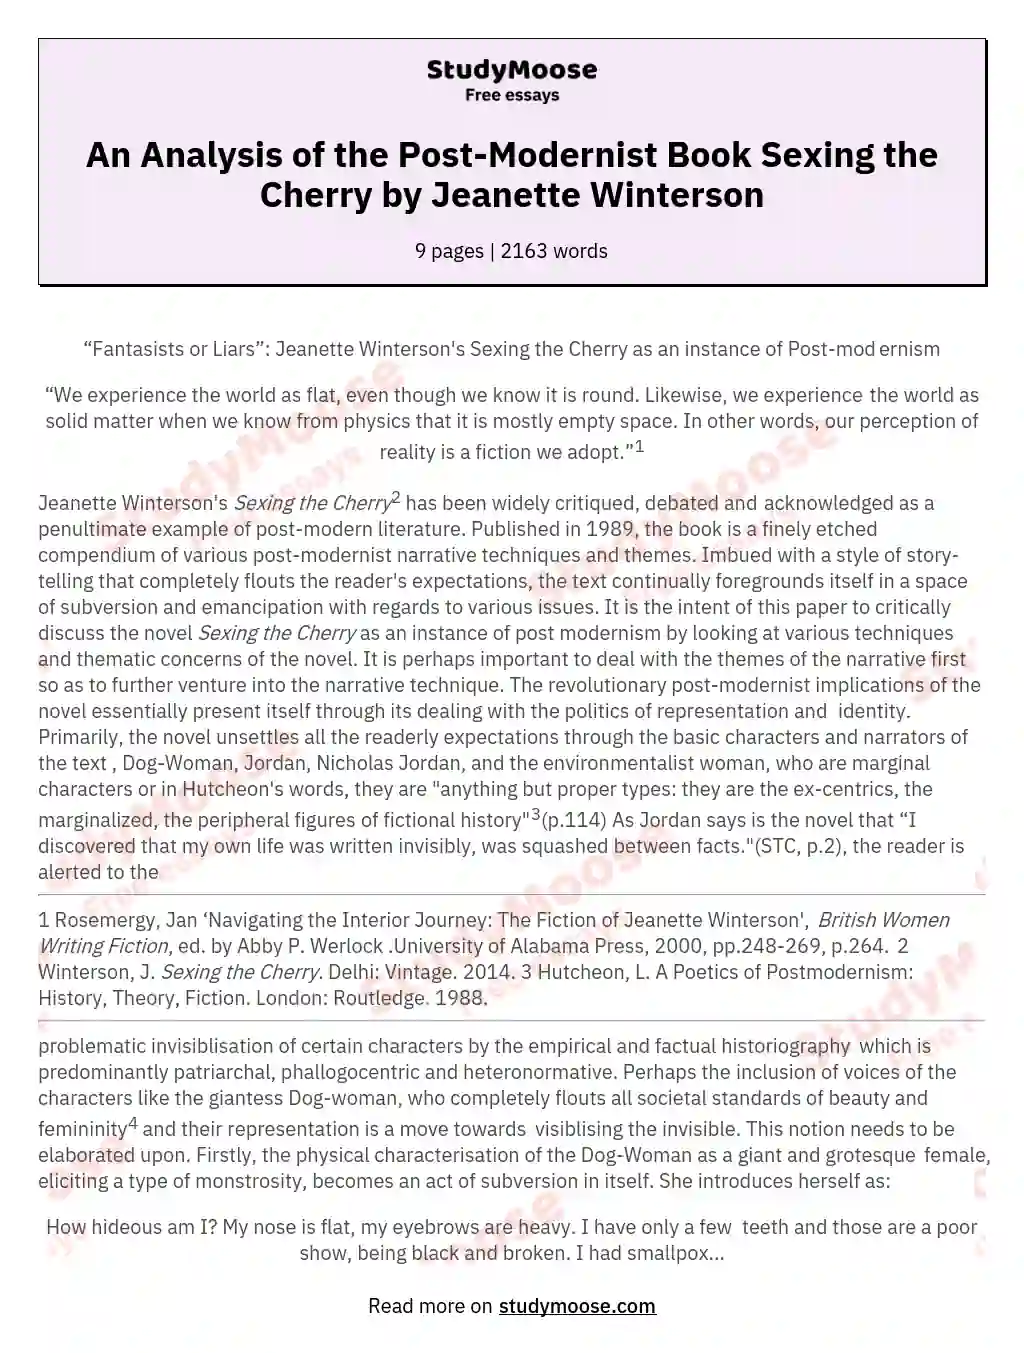 An Analysis of the Post-Modernist Book Sexing the Cherry by Jeanette Winterson essay